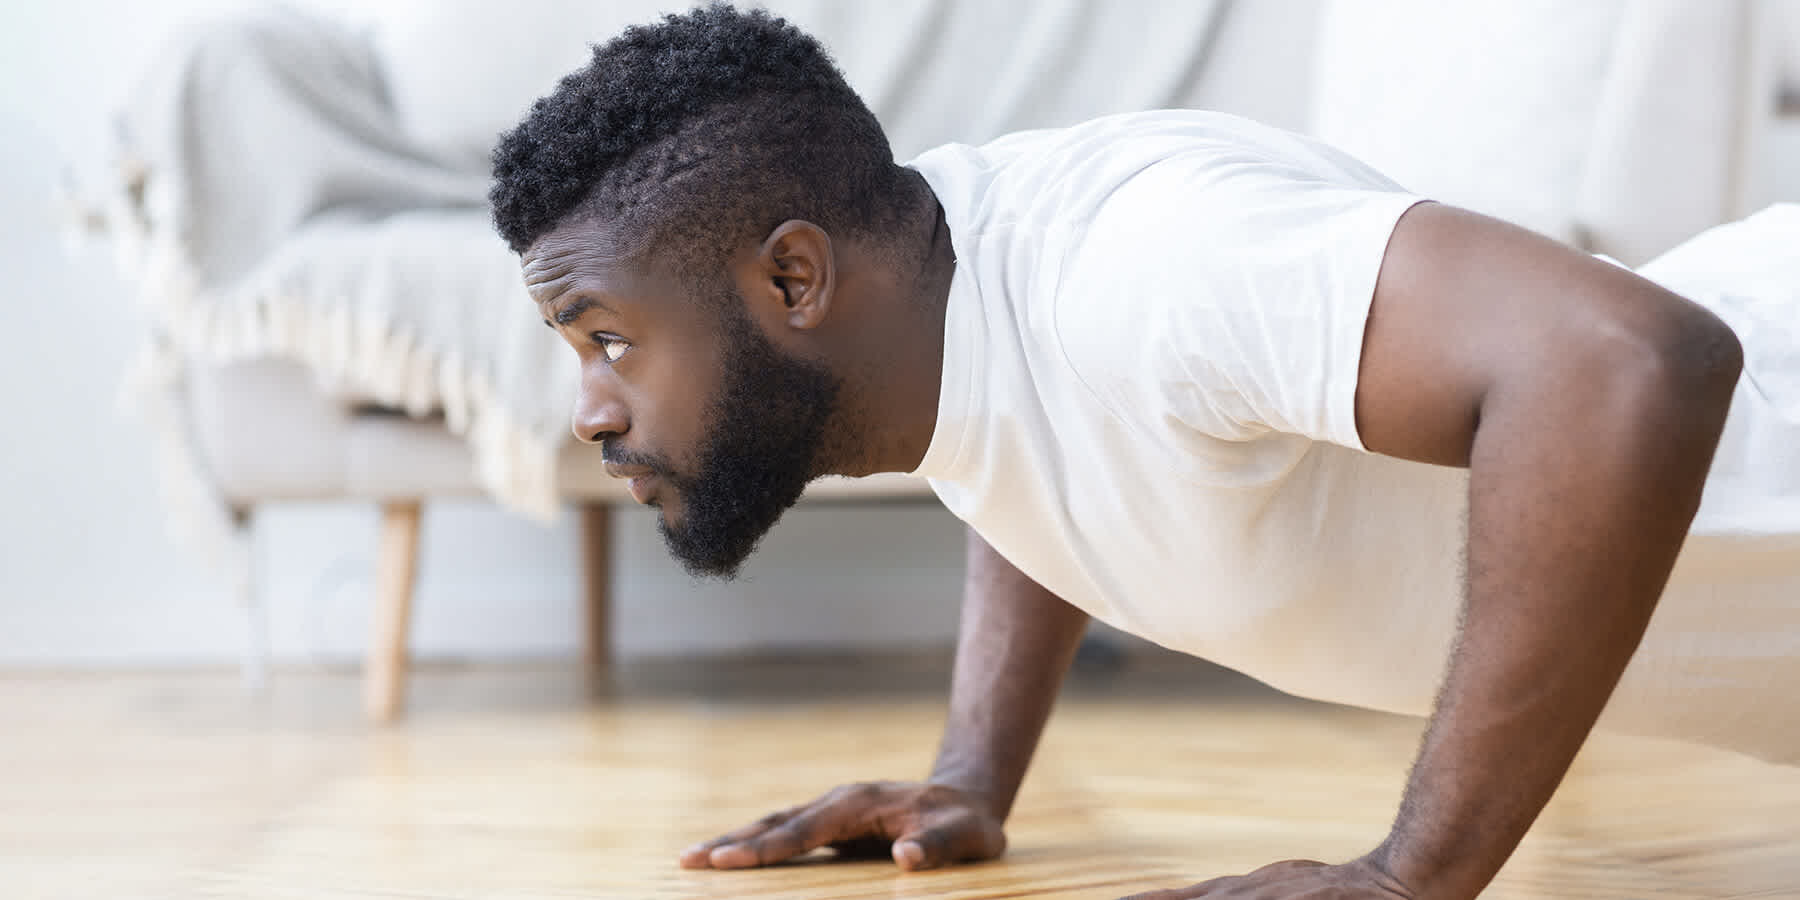 Young man doing push-ups while experiencing the benefits of DHEA